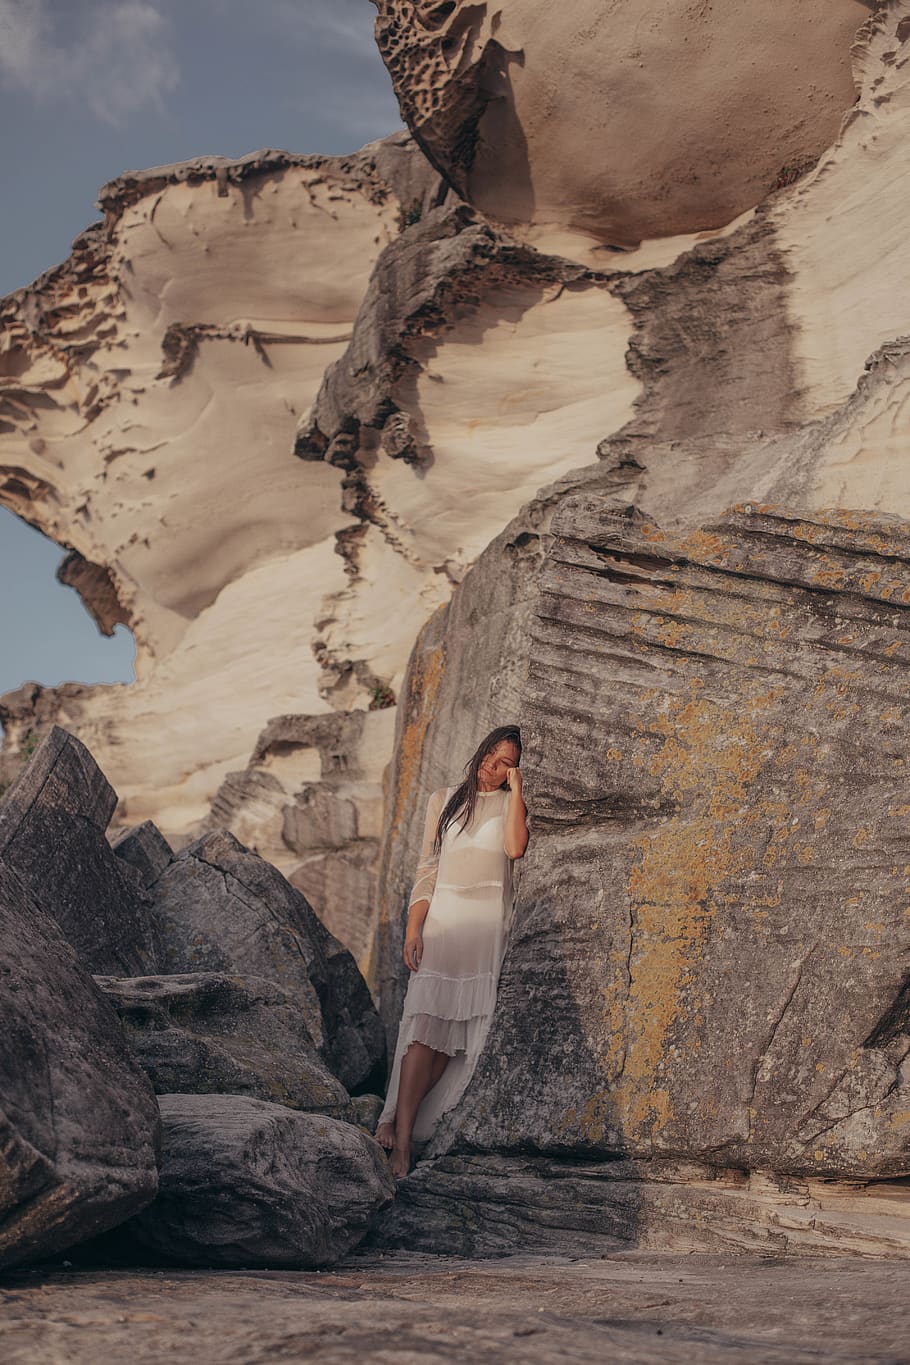 Woman in White Dress Standing on Rock Formation, adventure, canyon